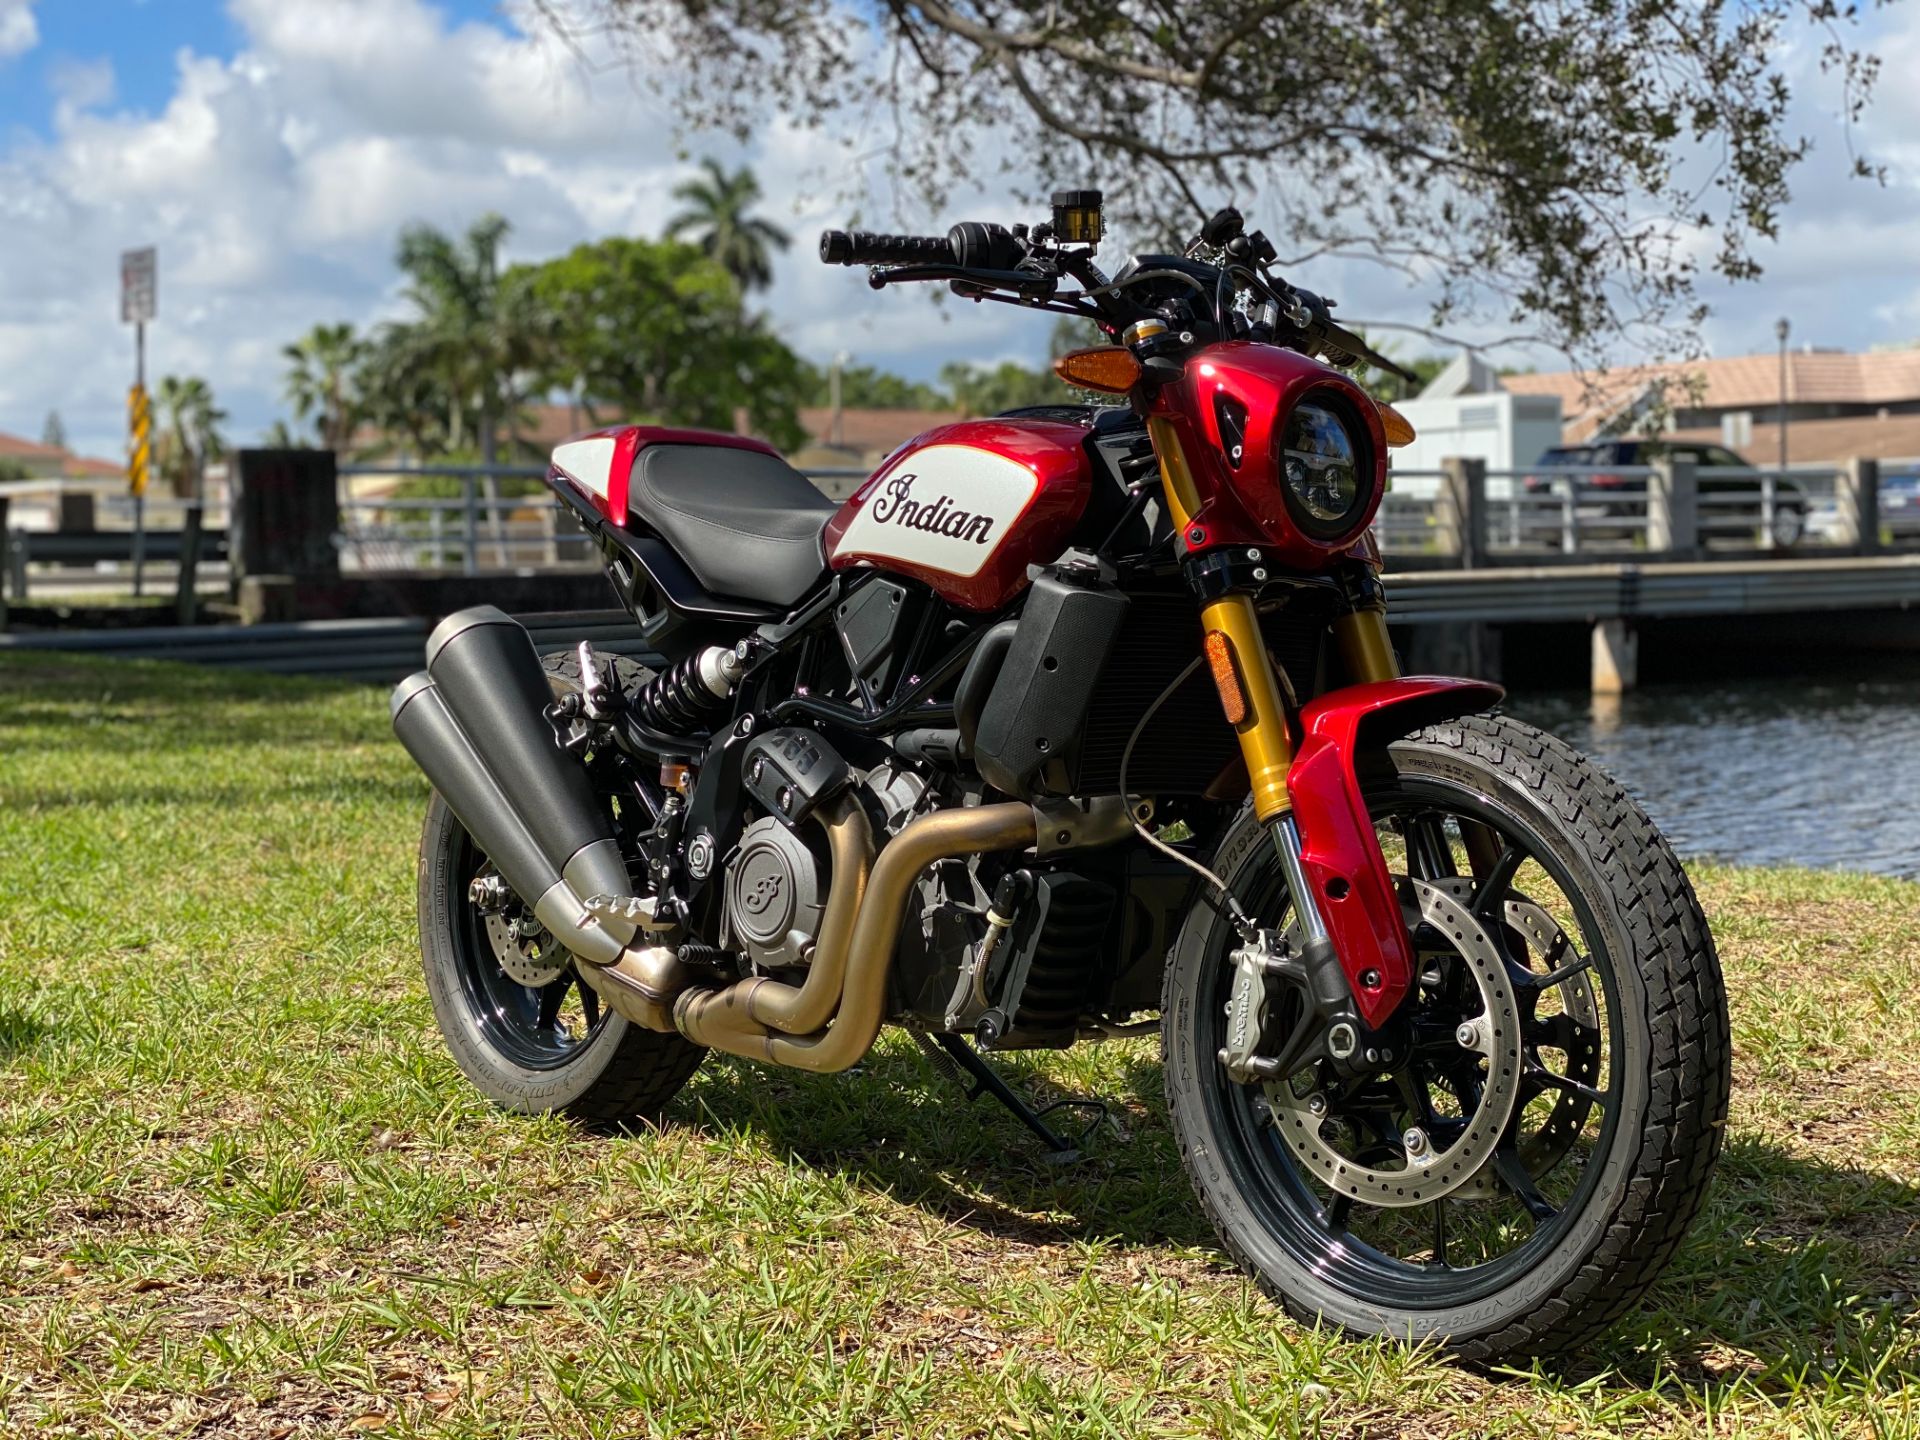 2019 Indian Motorcycle FTR™ 1200 S in North Miami Beach, Florida - Photo 1